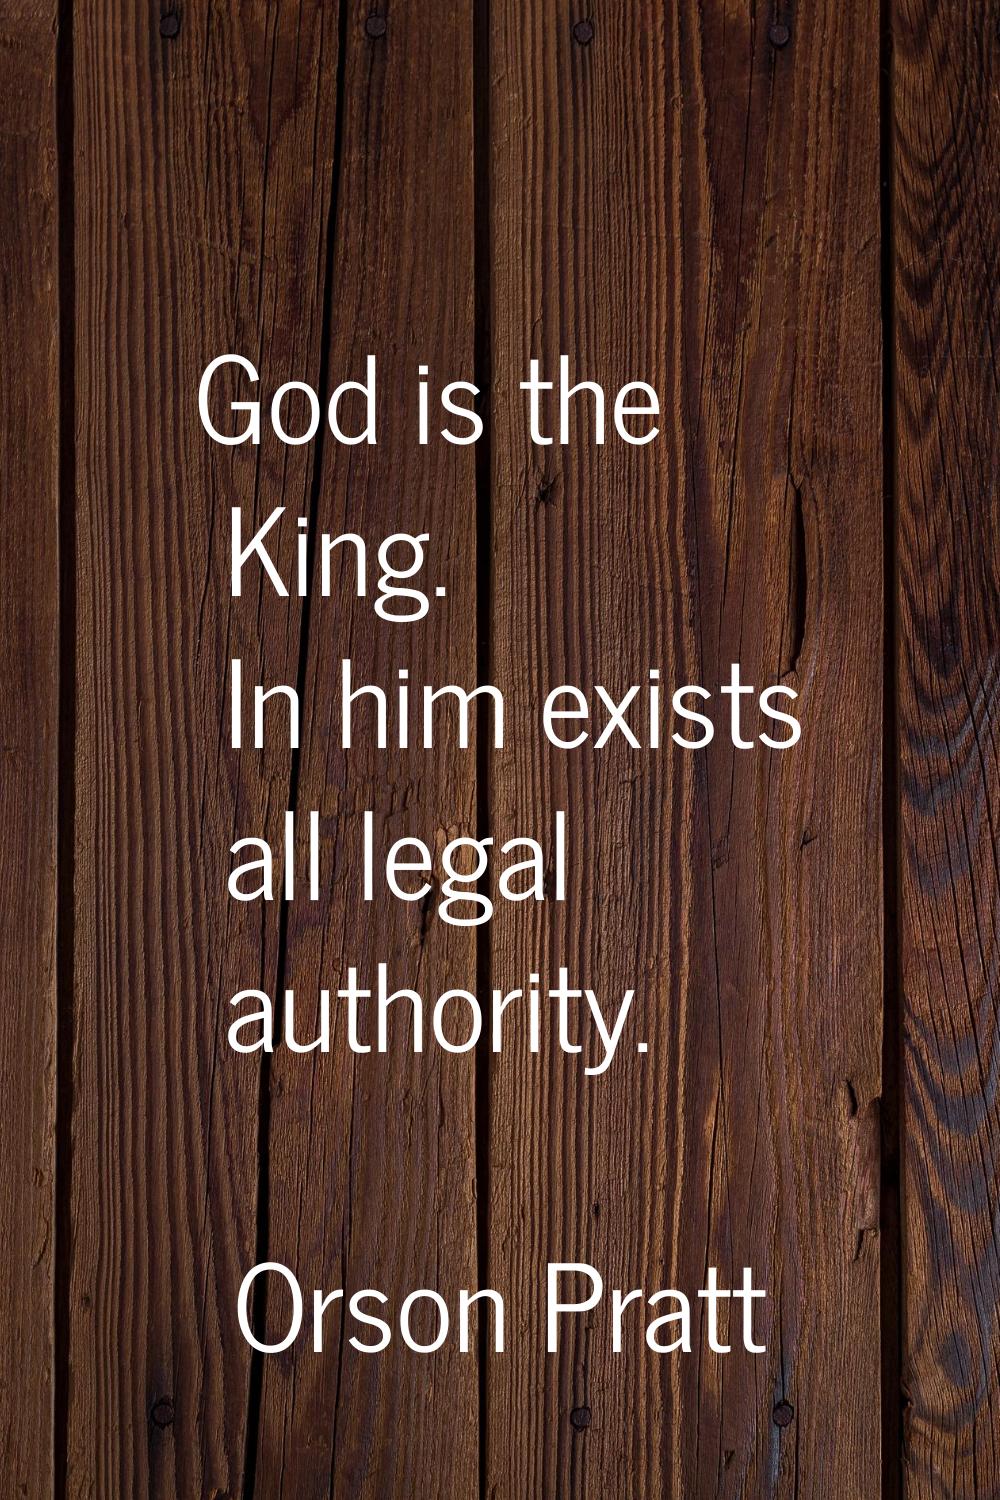 God is the King. In him exists all legal authority.